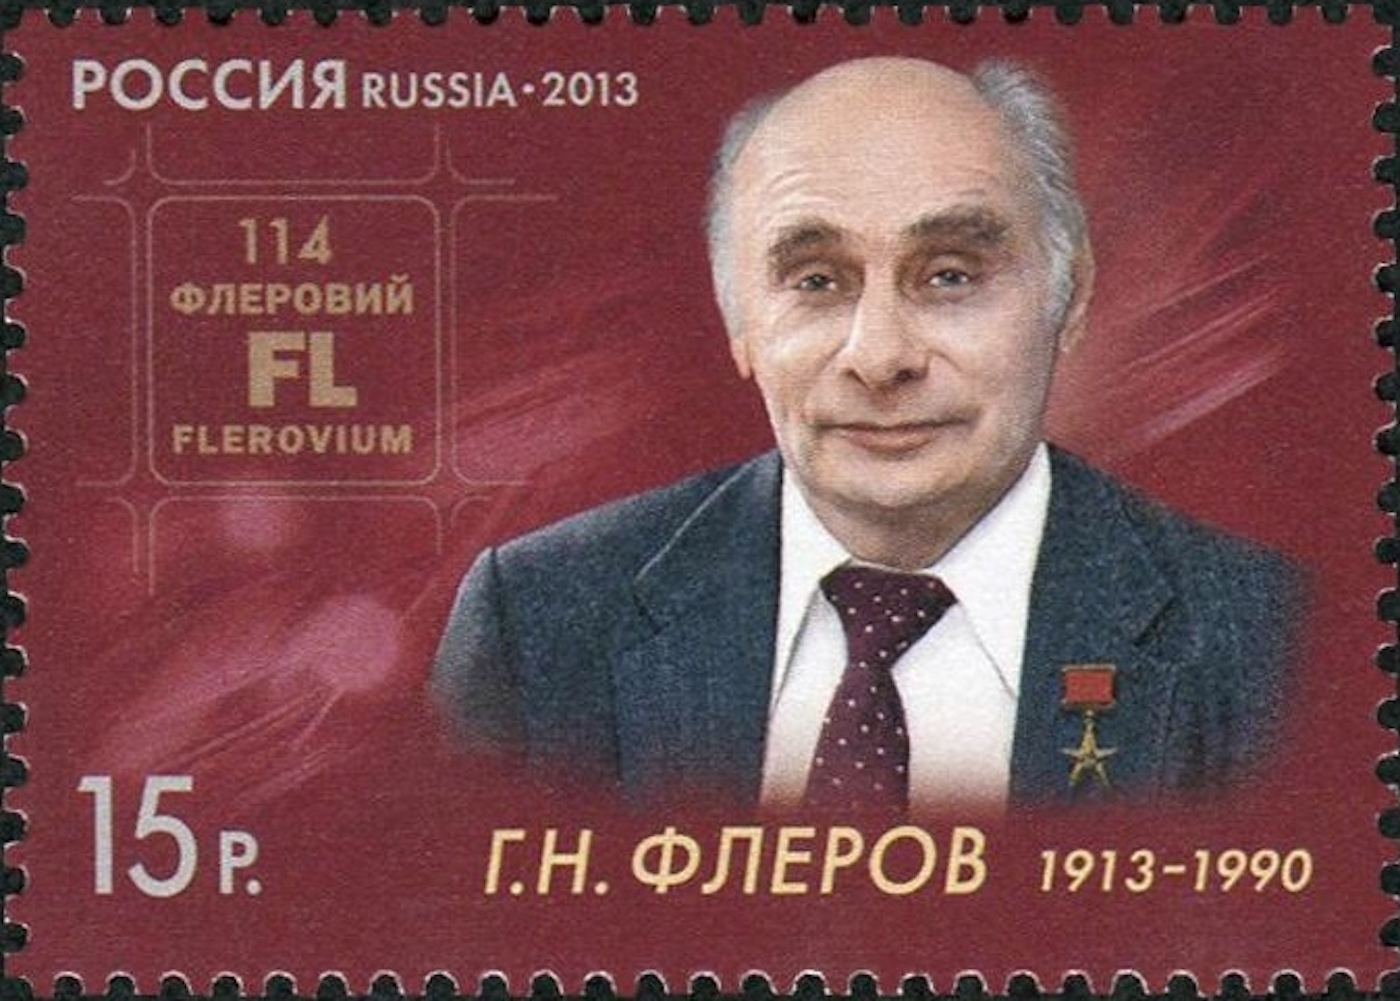 Le flérovium tient son nom du physicien Gueorgui Fliorov. © Stamp issuing authority – MARKA Publishing &amp; Trading Centre Printer – Association GOZNAK of the Ministry of Finance of the Russian Federation, Wikipédia, DP

